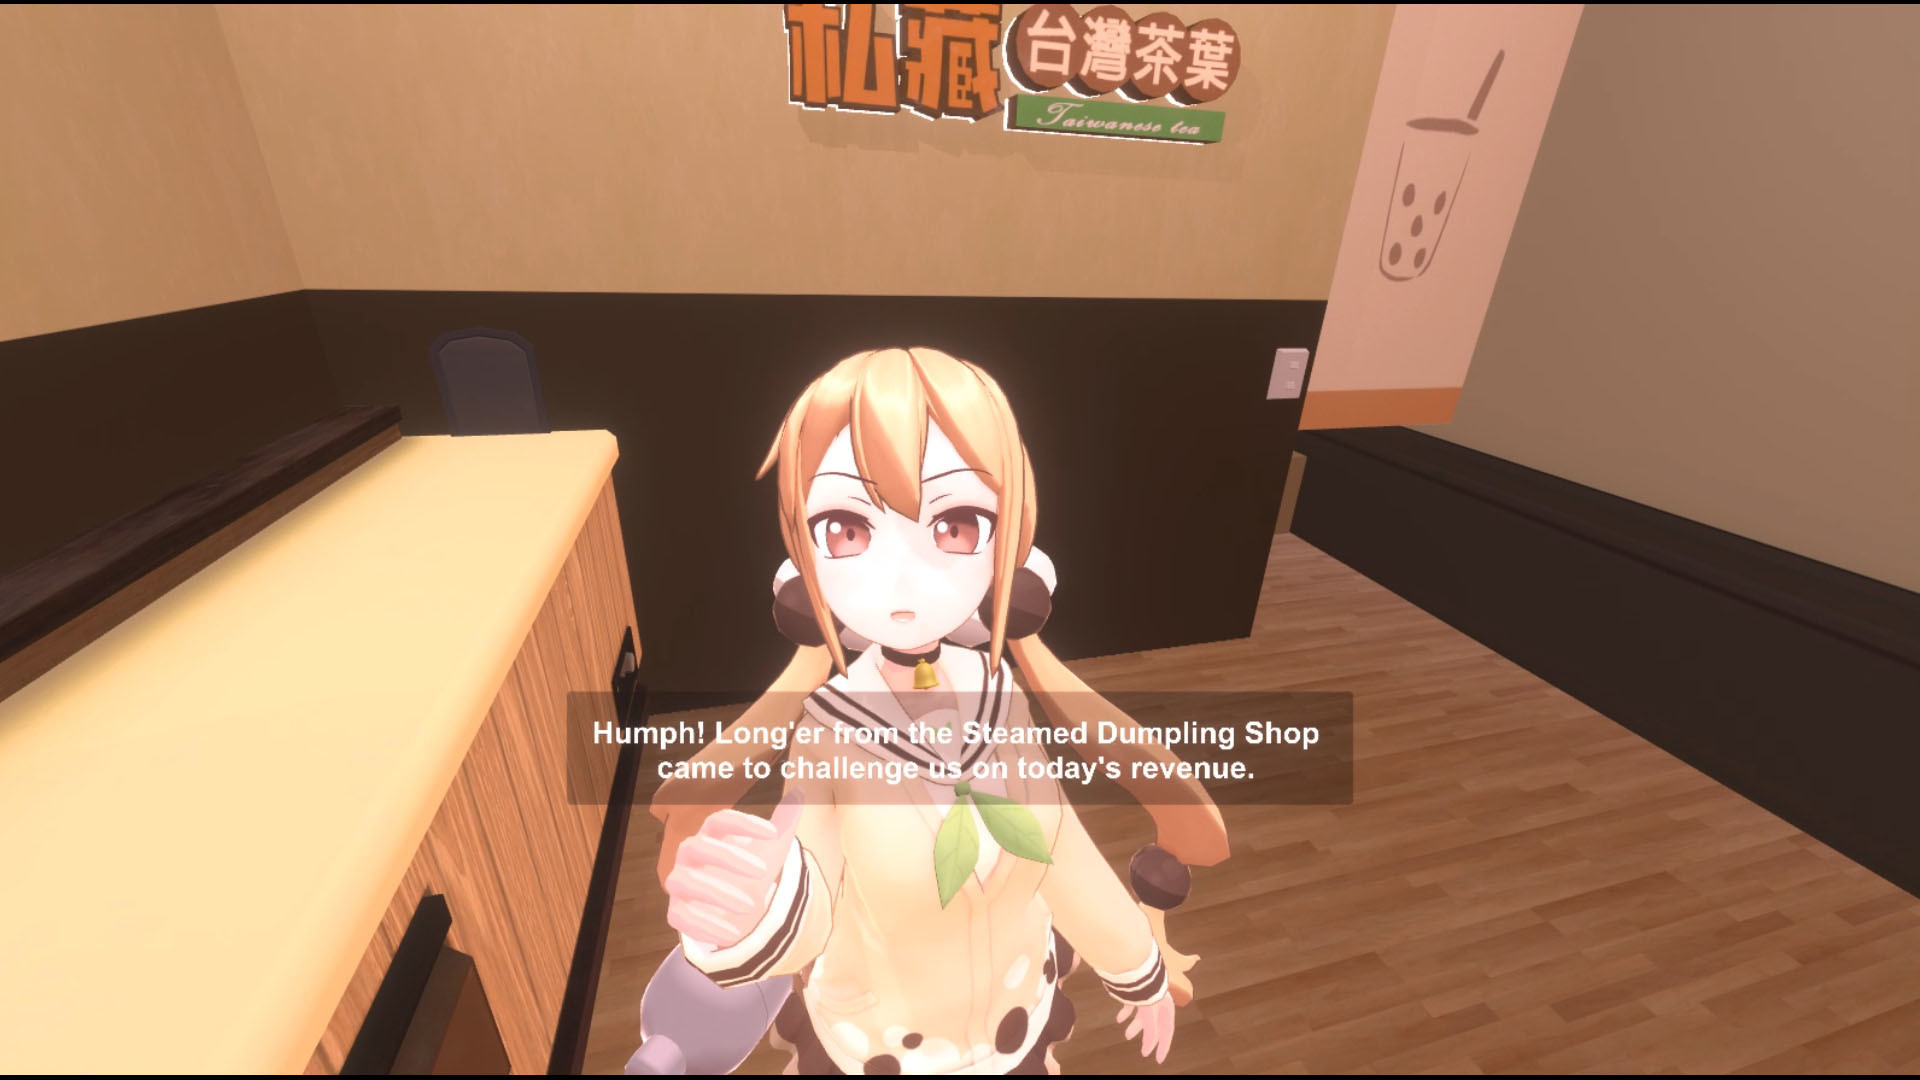 Food Girls - Bubbles' Drink Stand VR